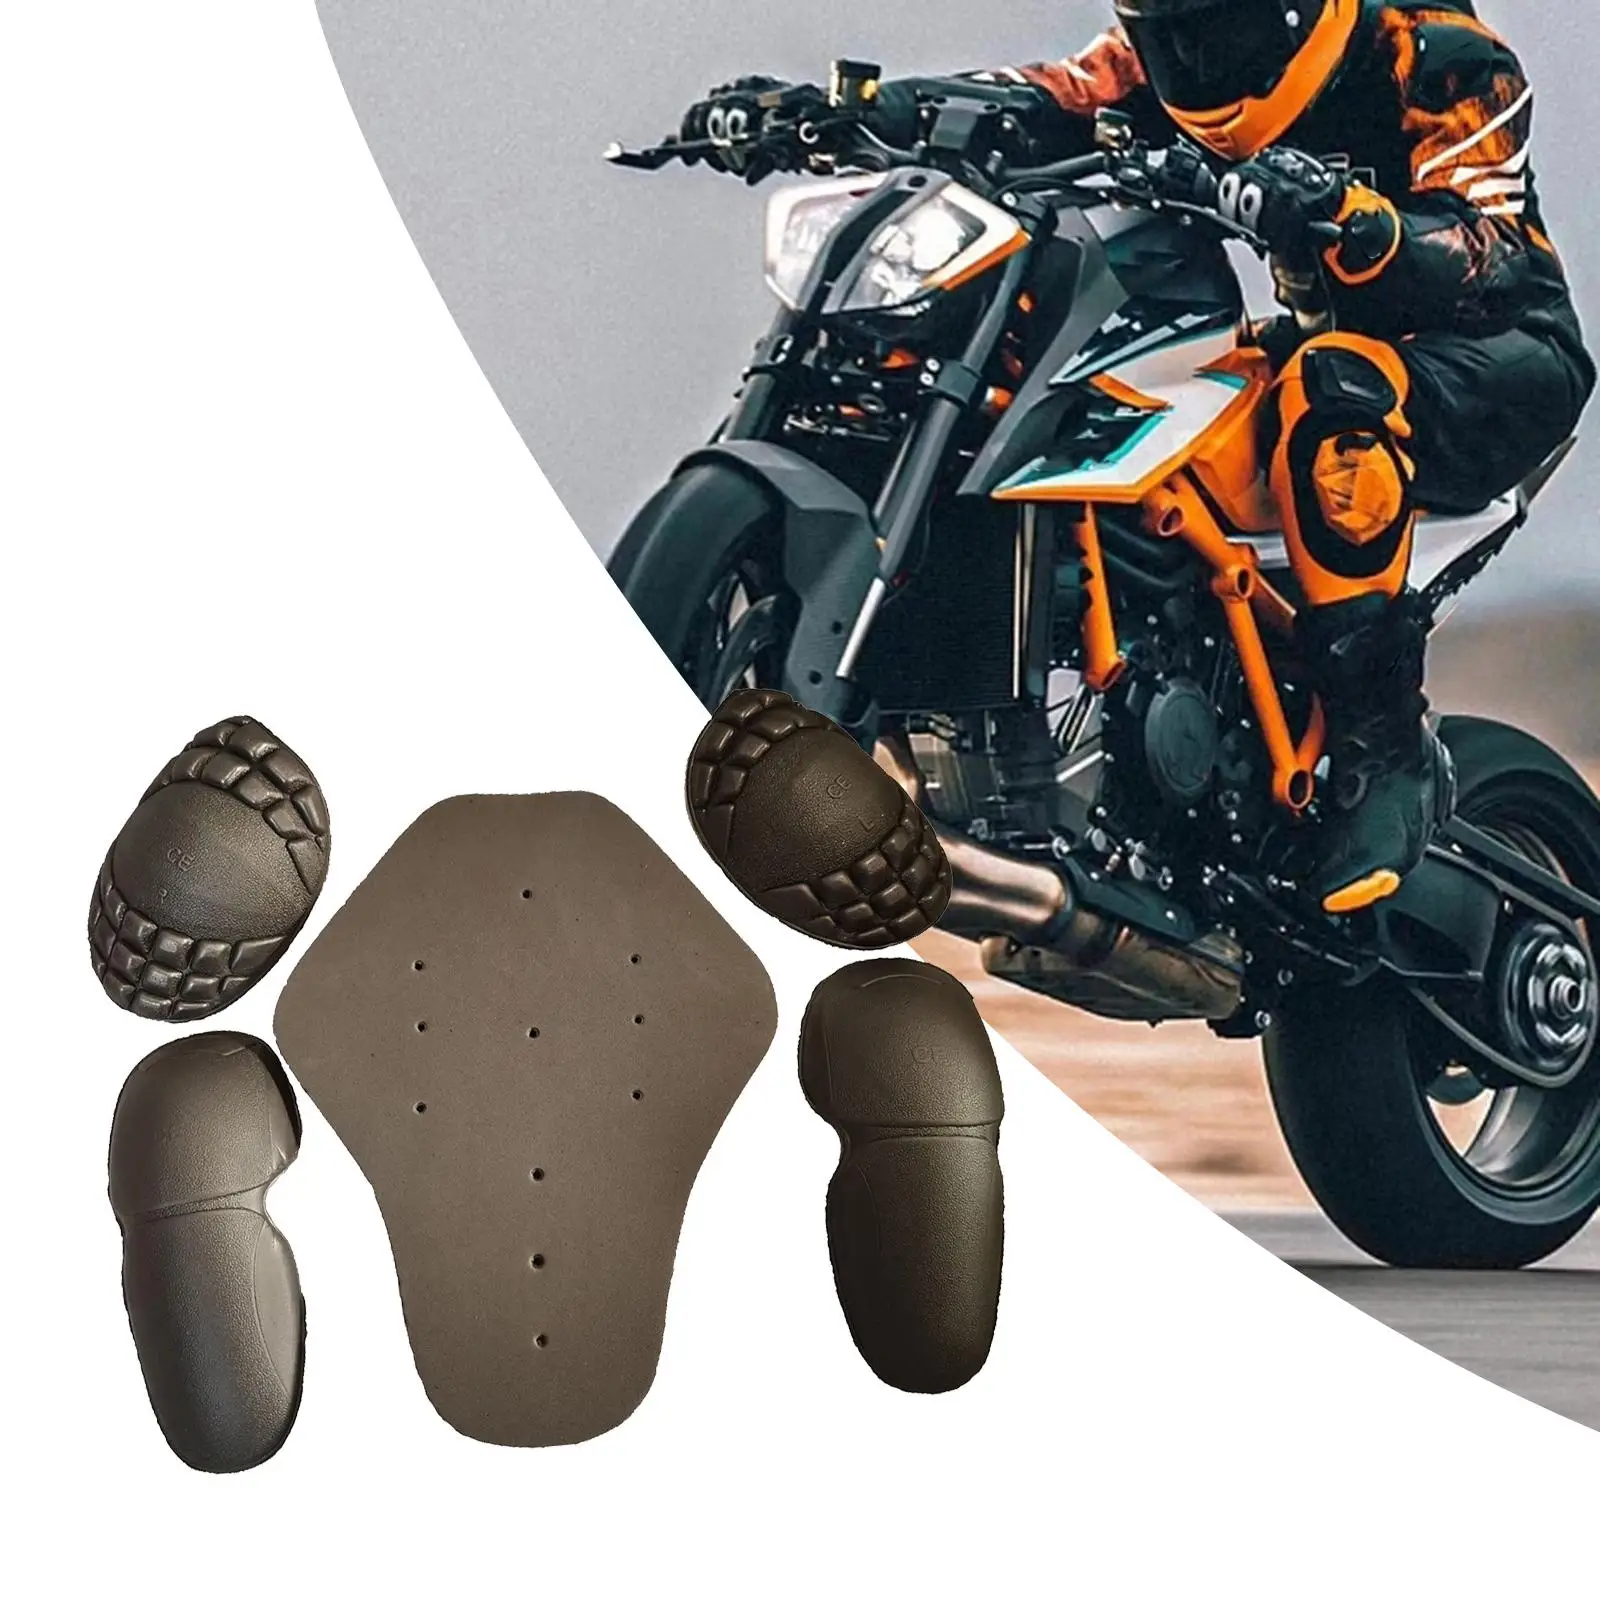 5x Motorbike Body Protective Gear EVA Detachable Insert Protector Set Motorbike Protection Pad for Motocross Sport Adults